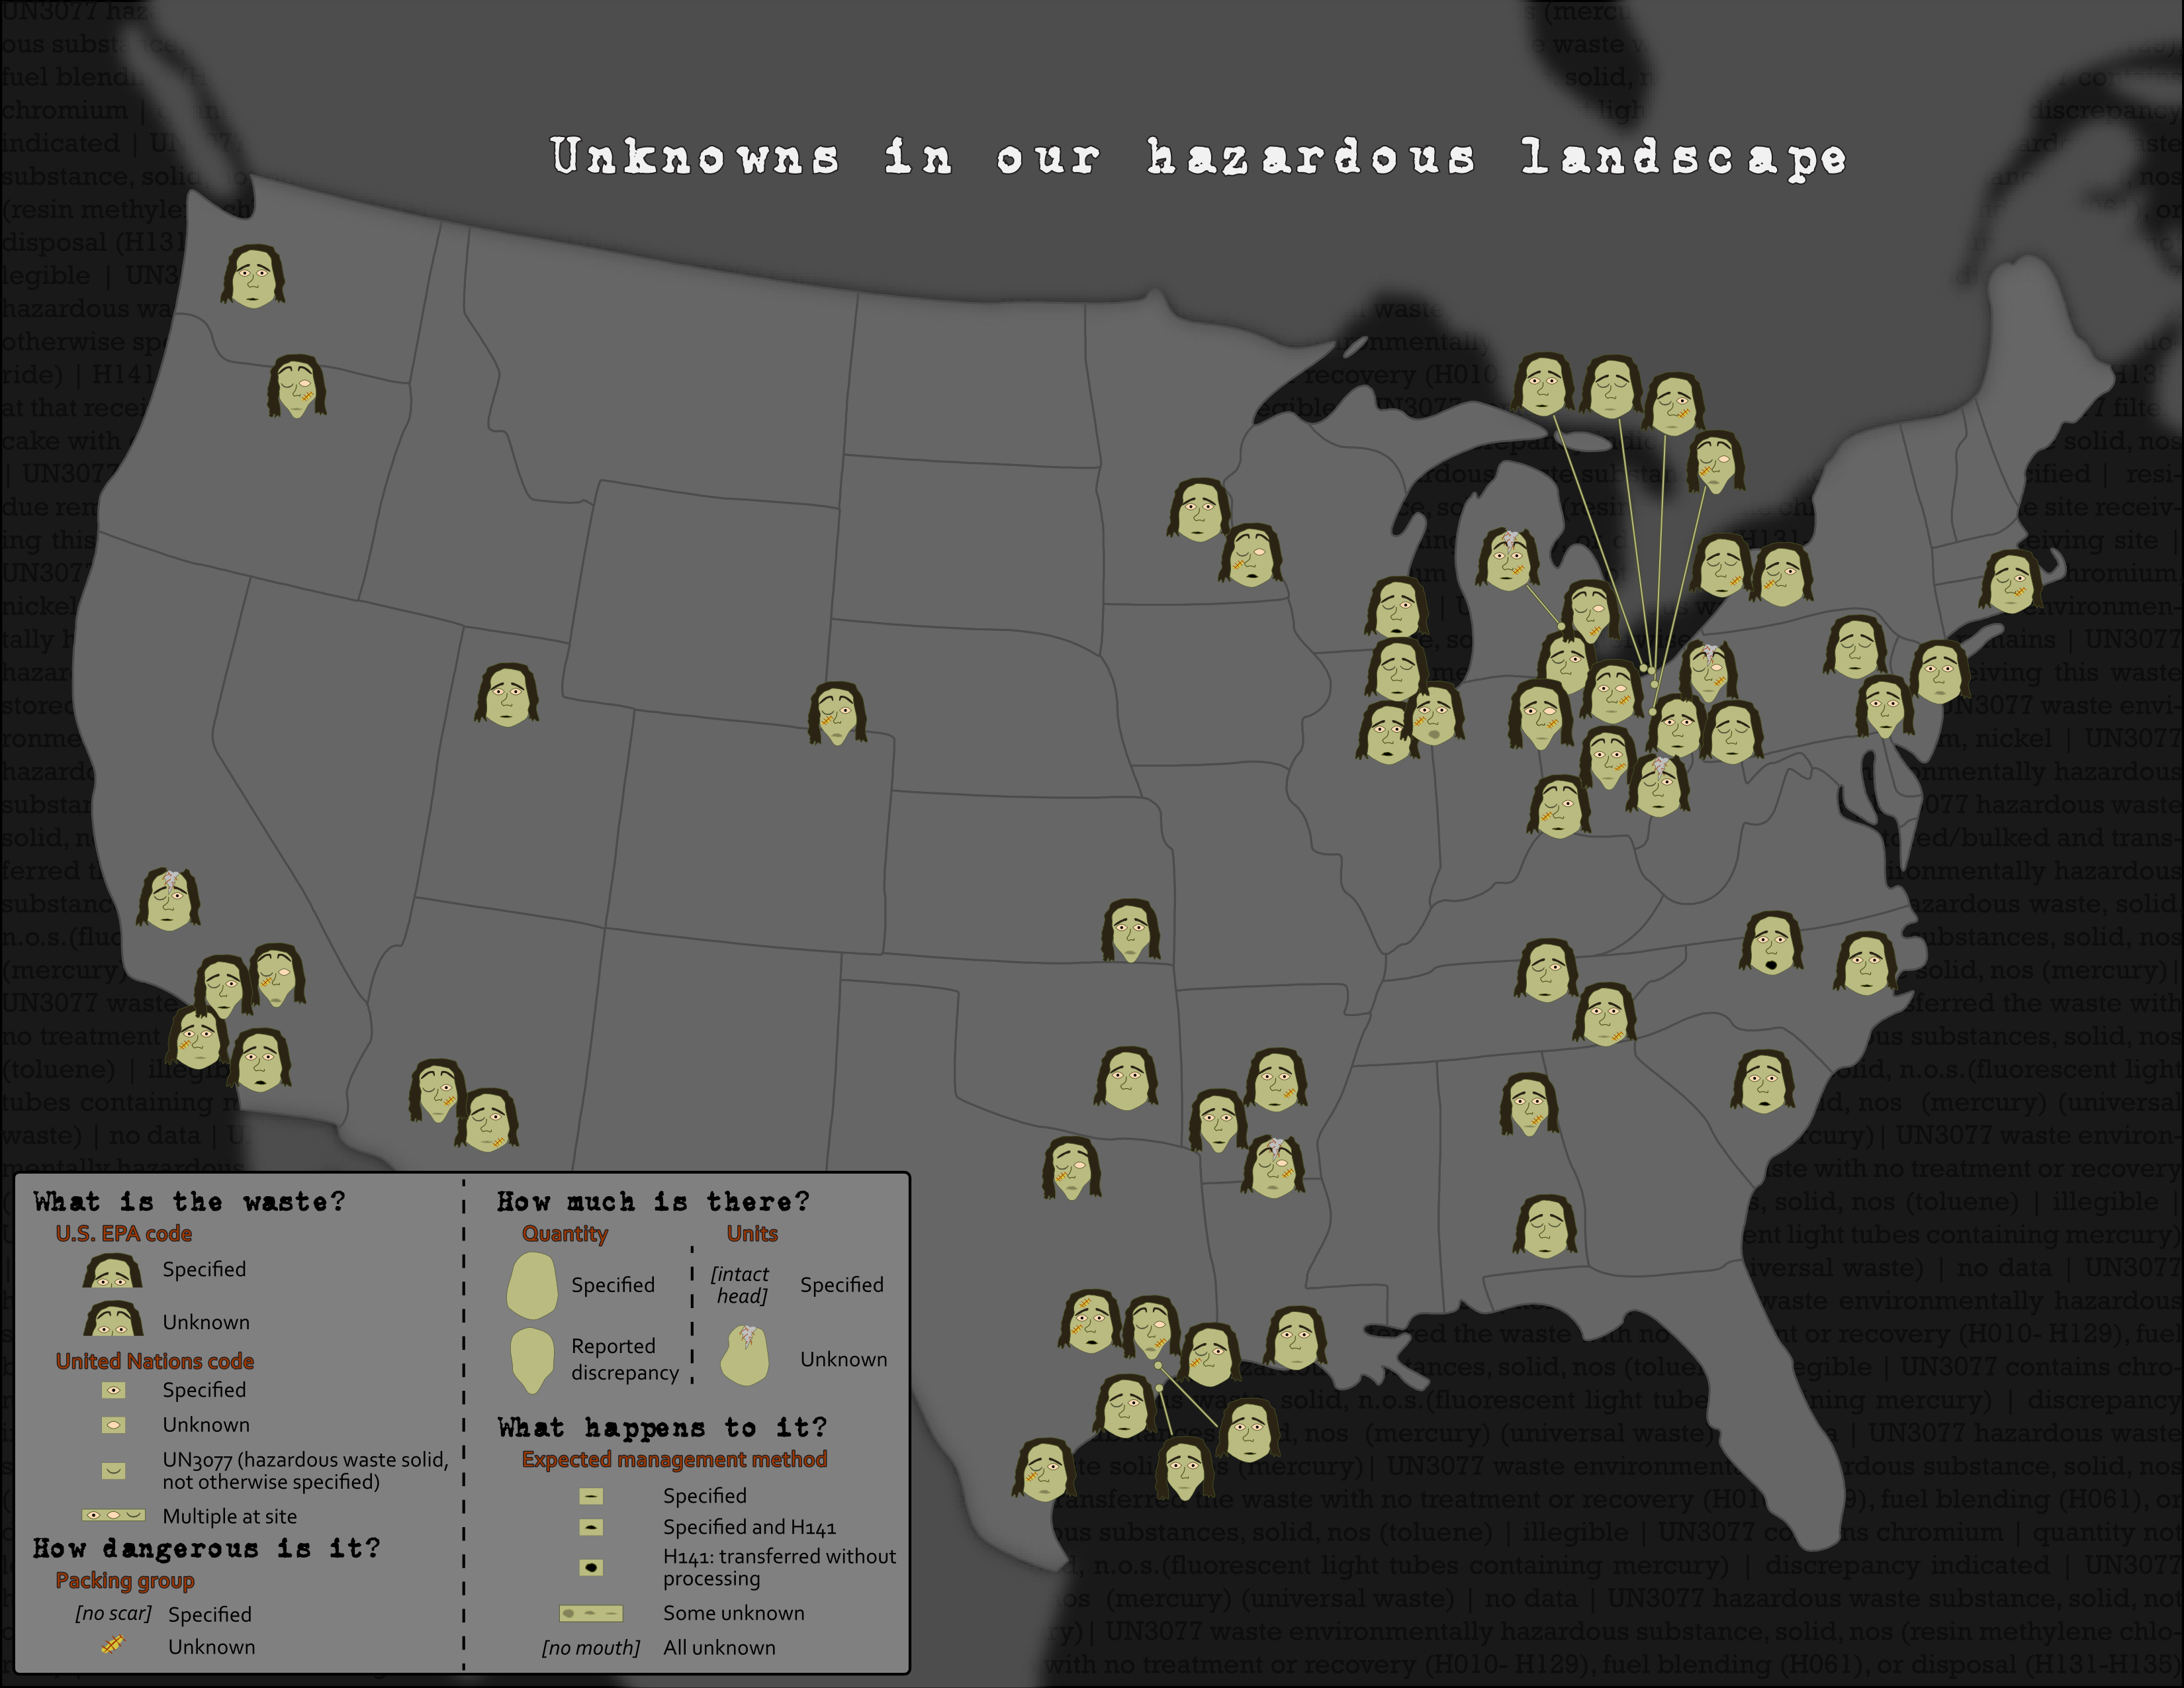 US map of "Unknowns in our hazardous landscape," see surrounding text